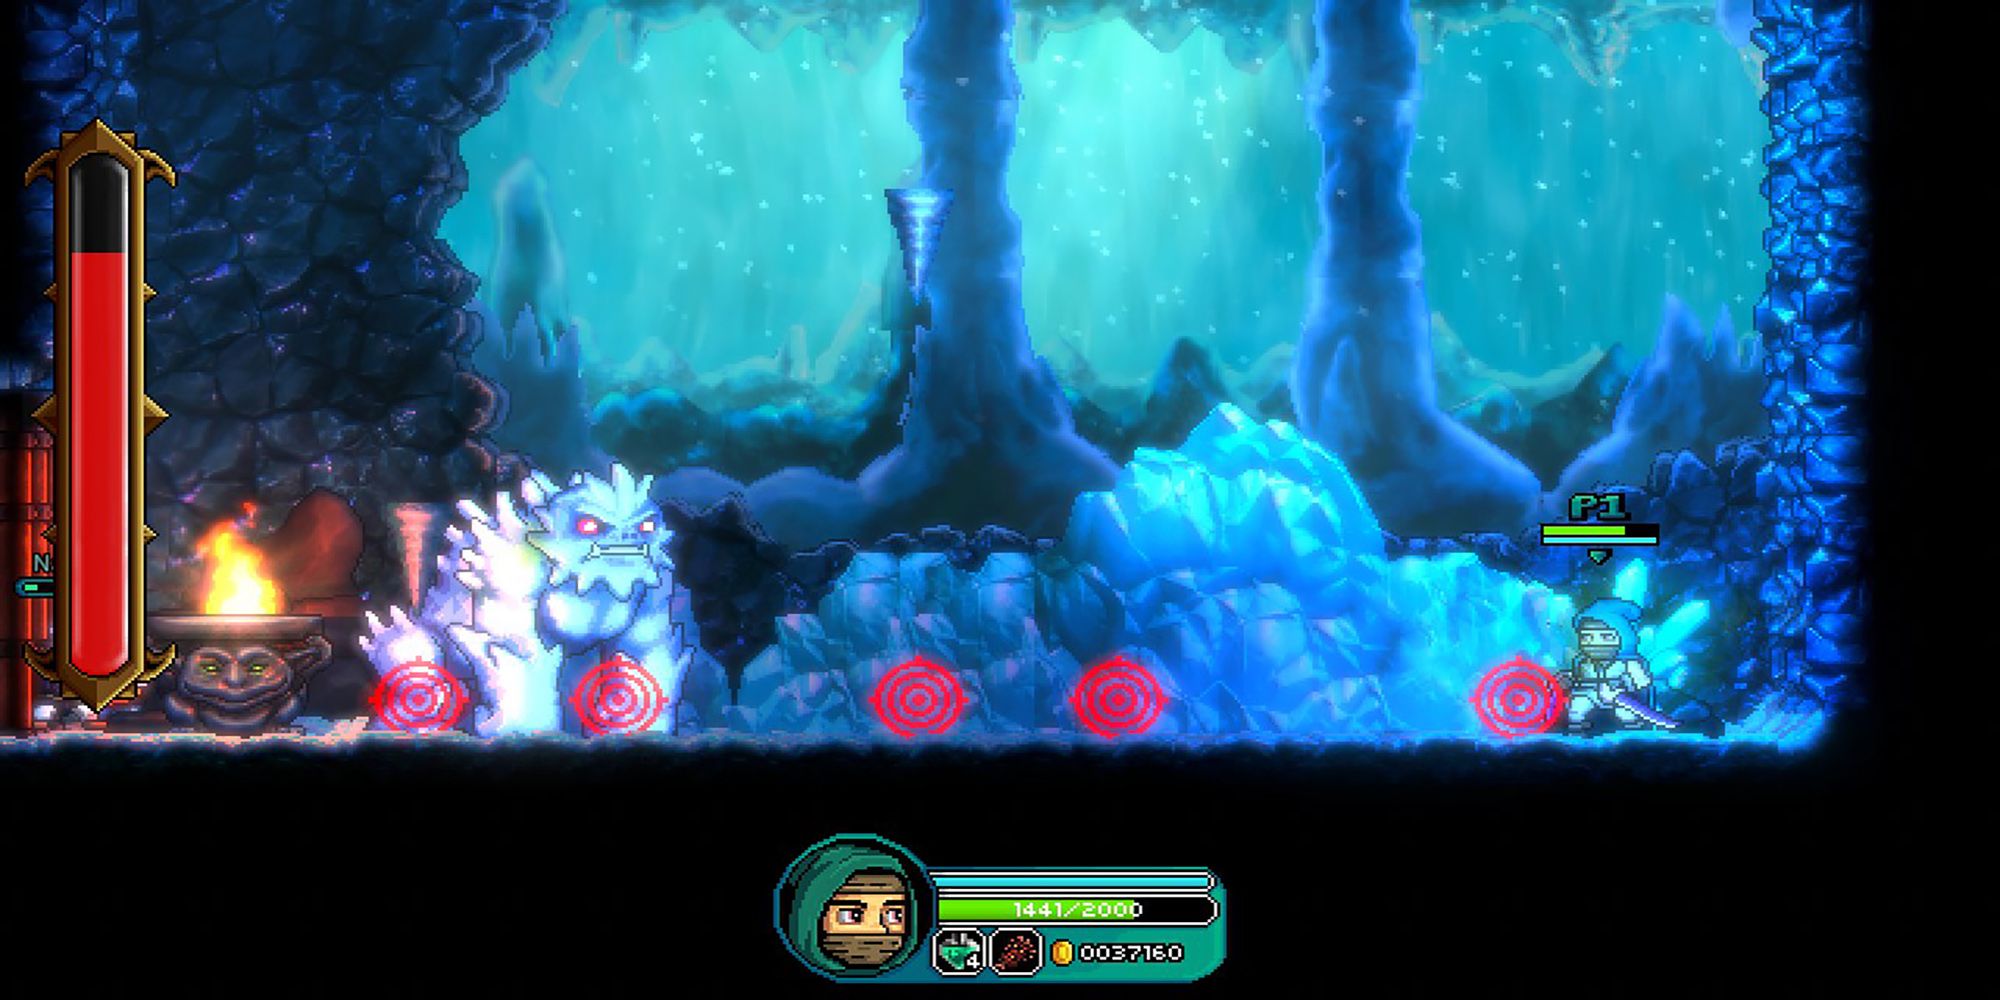 The Rogue avoids falling icicle targets during a boss battle in the Ice Caves in Bravery And Greed.